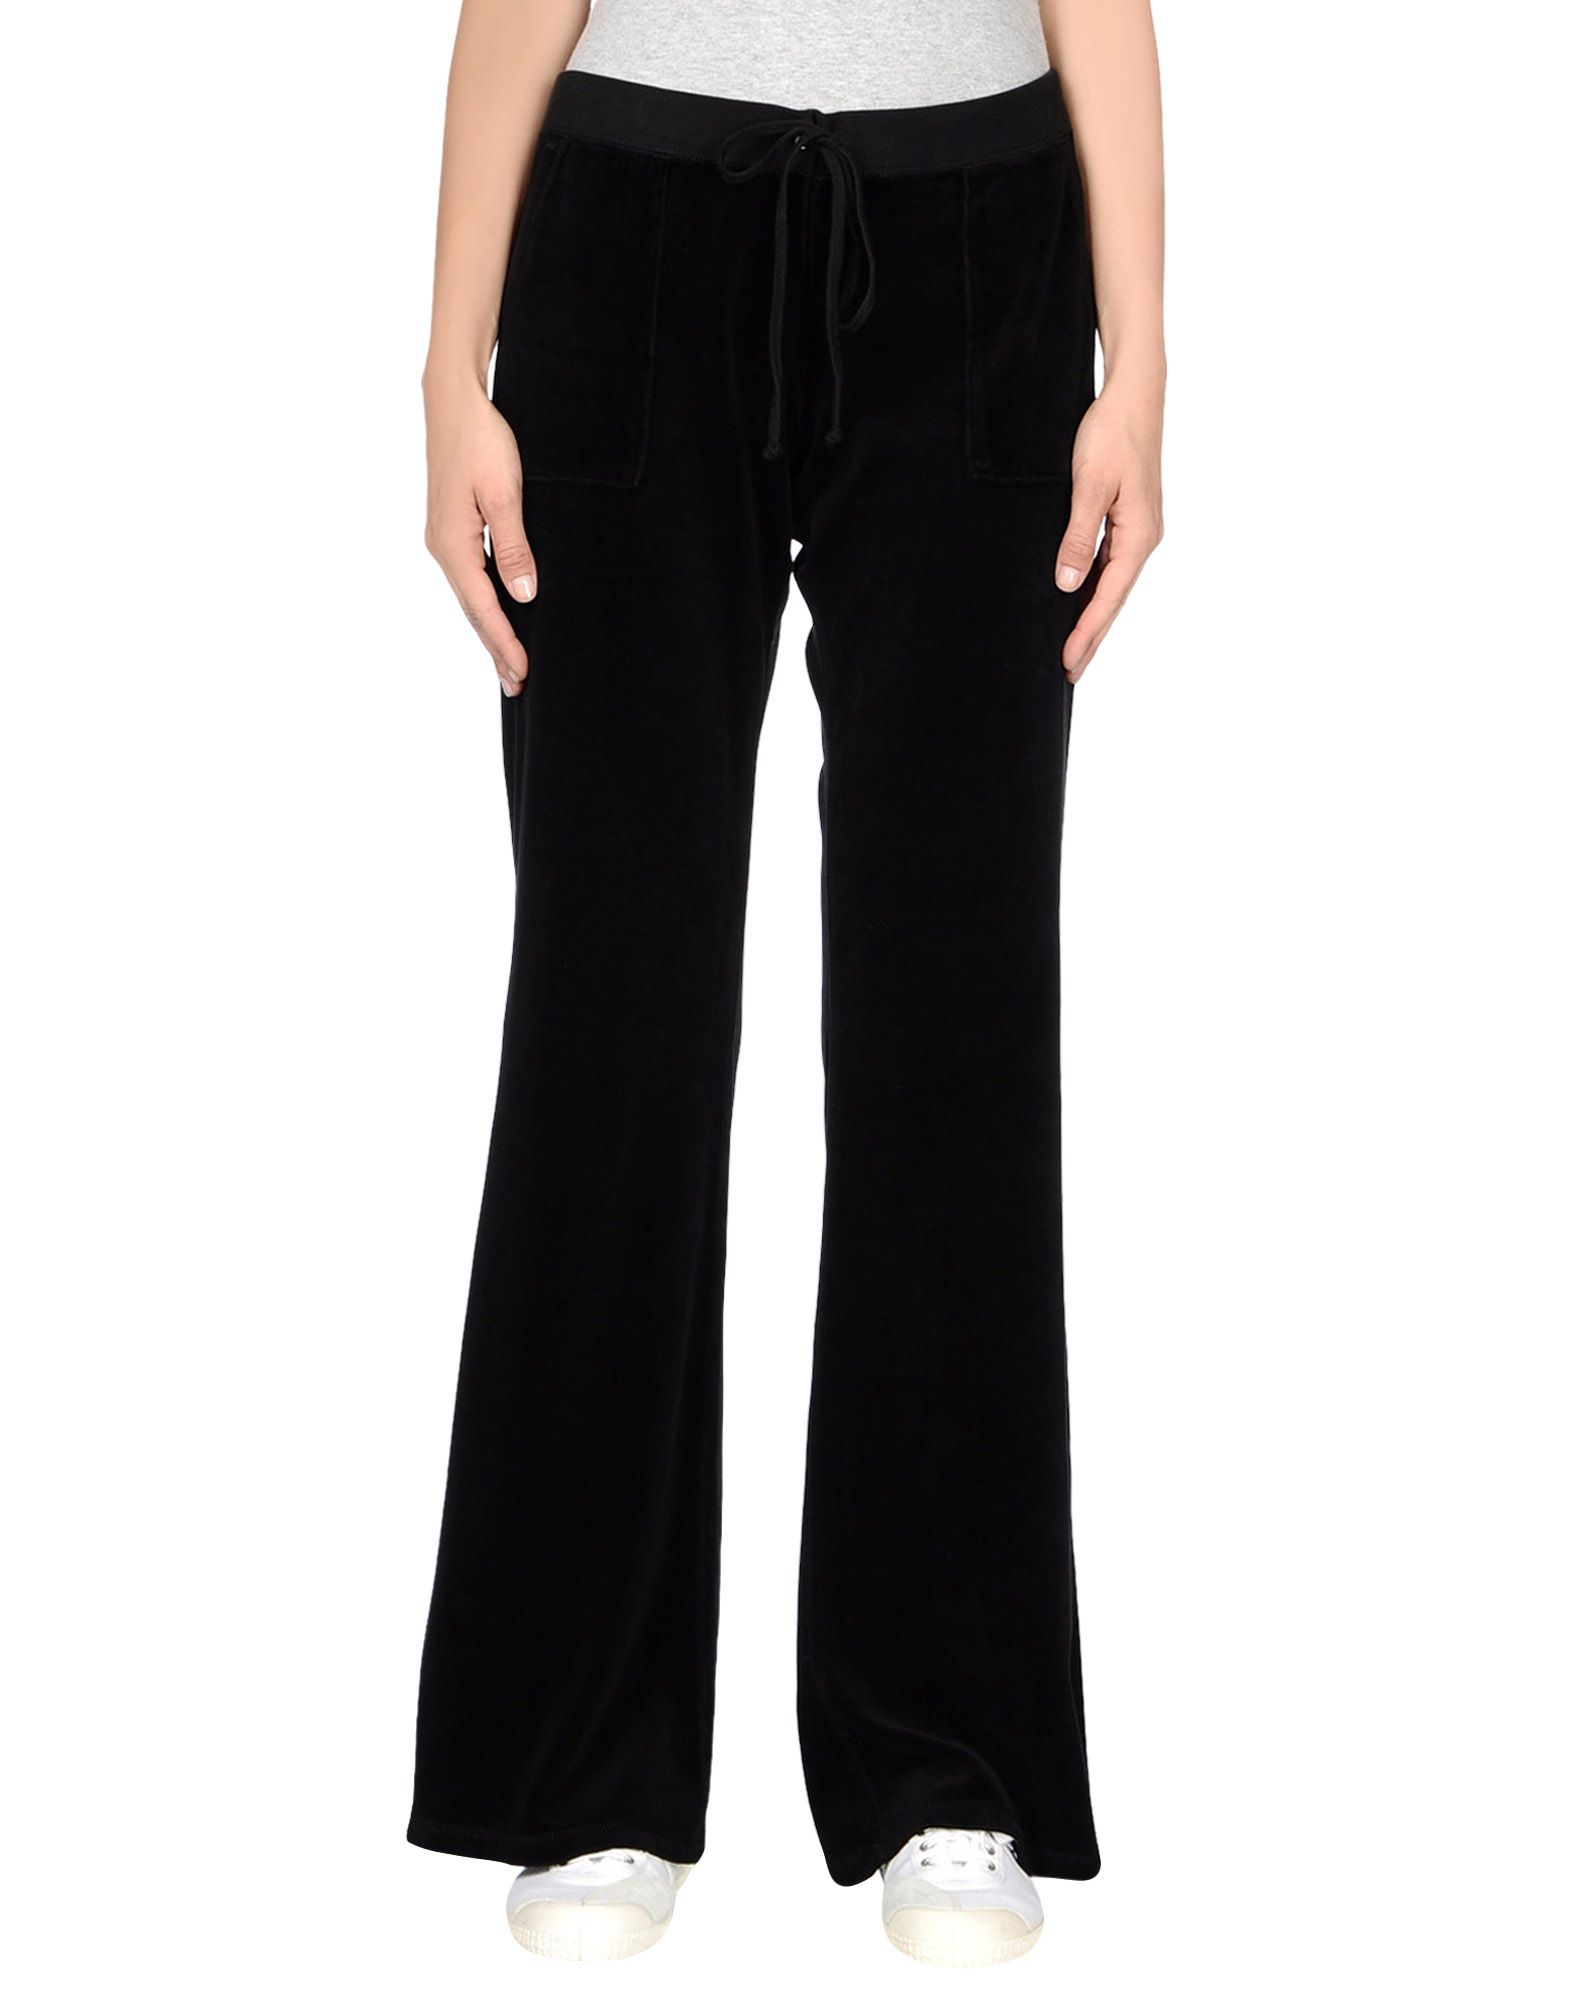 Juicy Couture Sweatpants in Black | Lyst